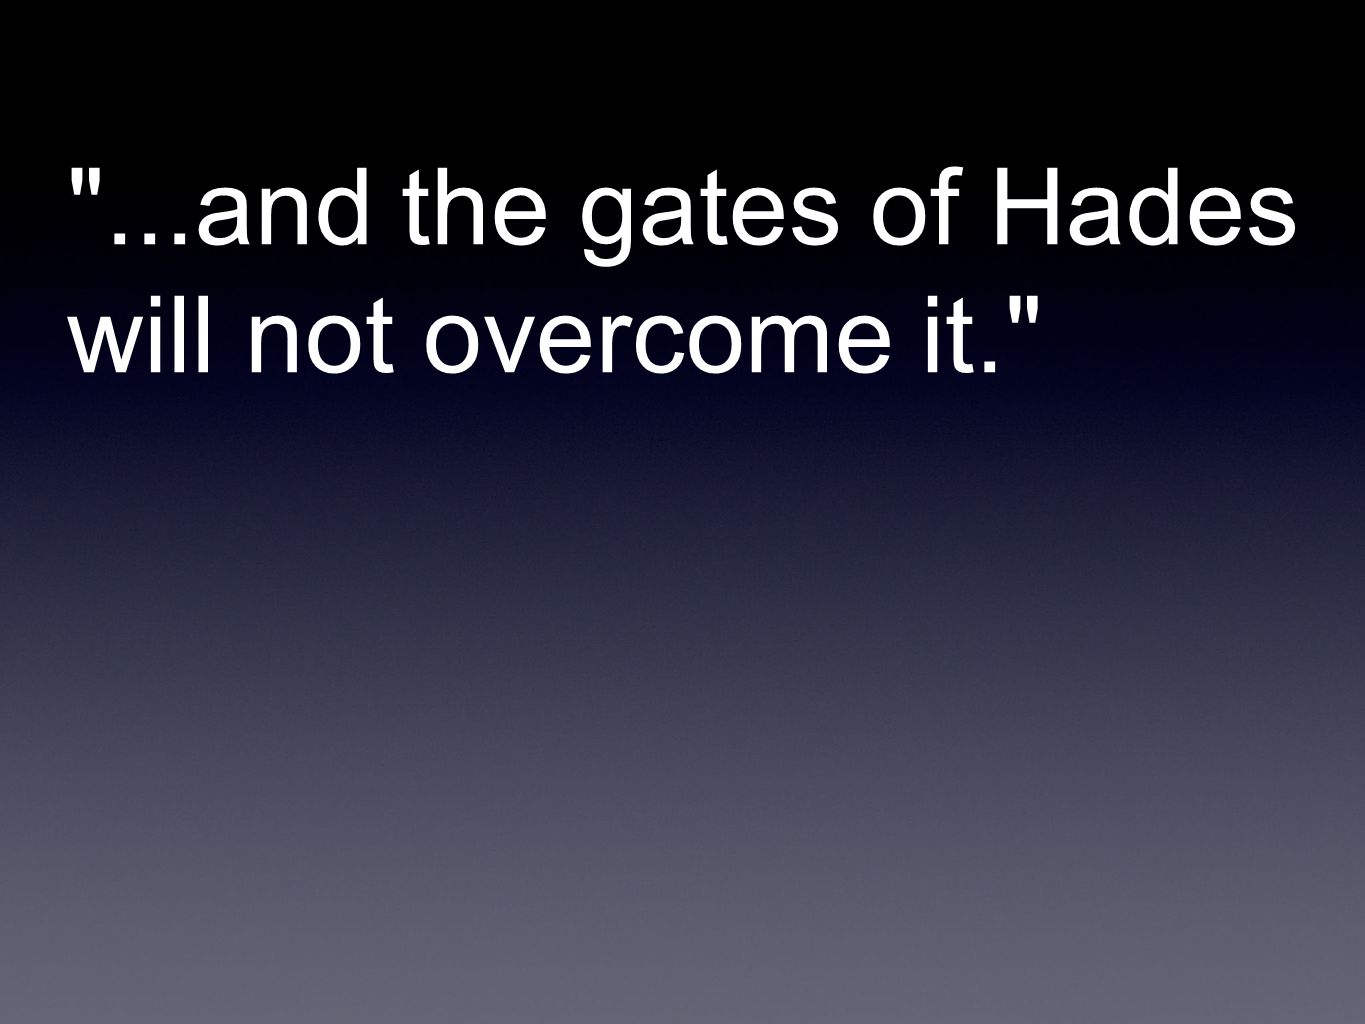 ...and the gates of Hades will not overcome it.